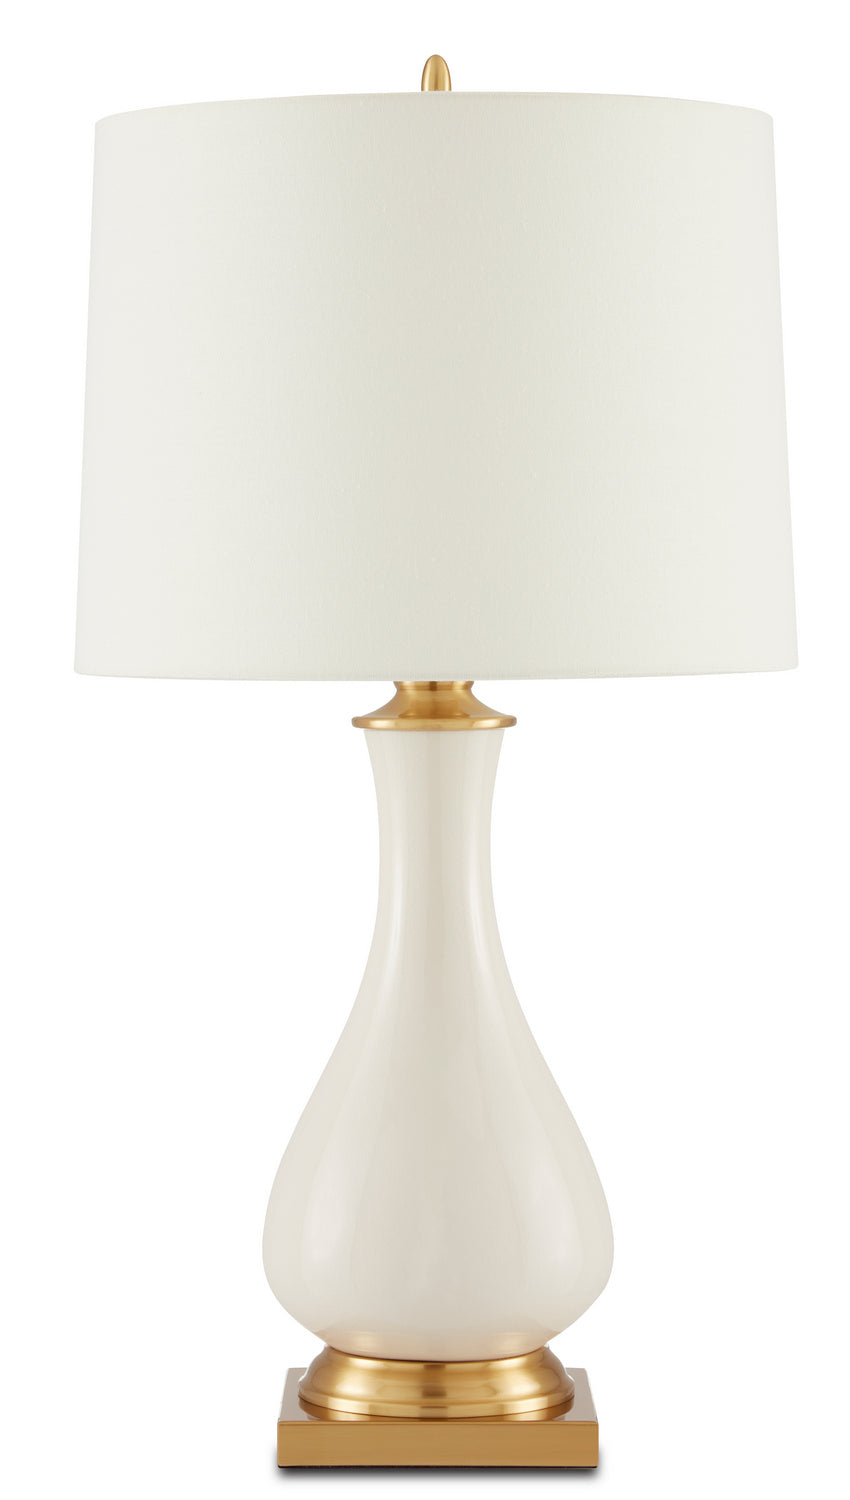 One Light Table Lamp from the Lynton collection in Cream Crackle/Brass finish